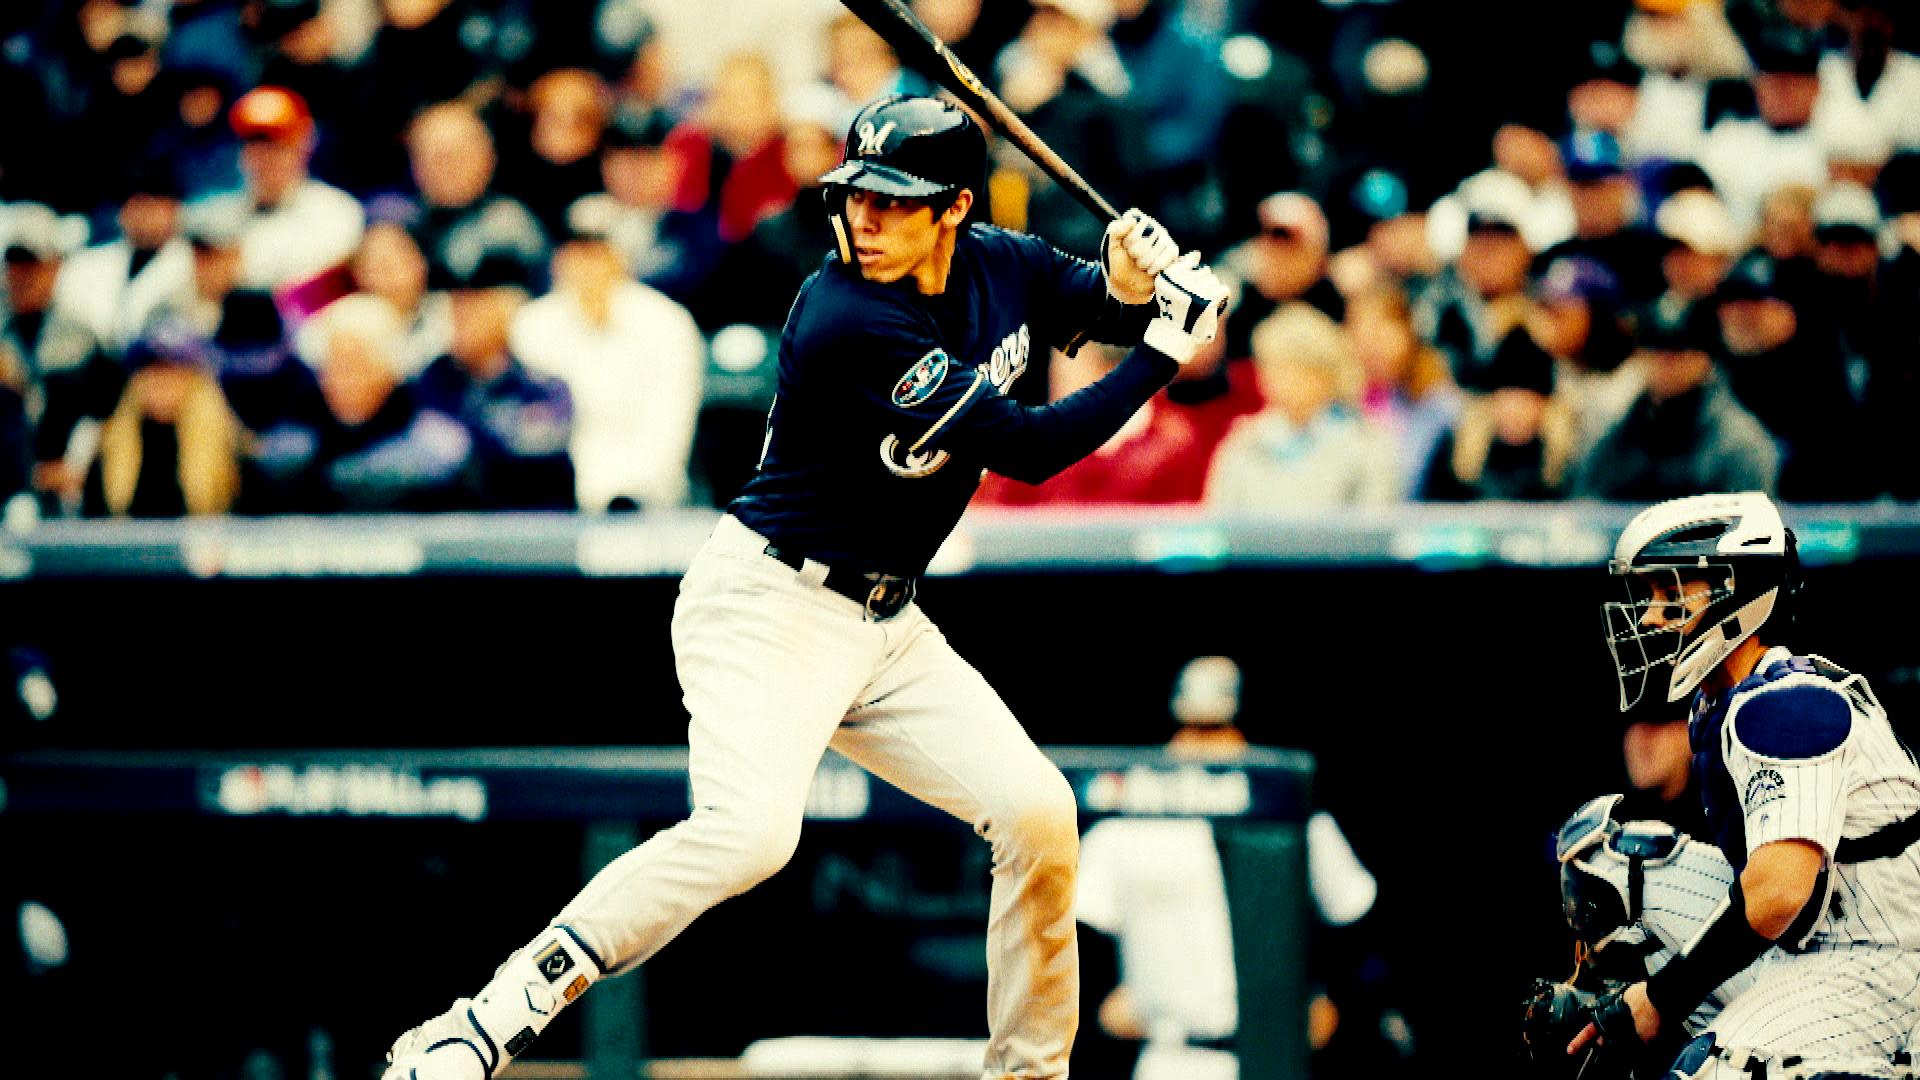 Christian Yelich Wallpaper Brewers